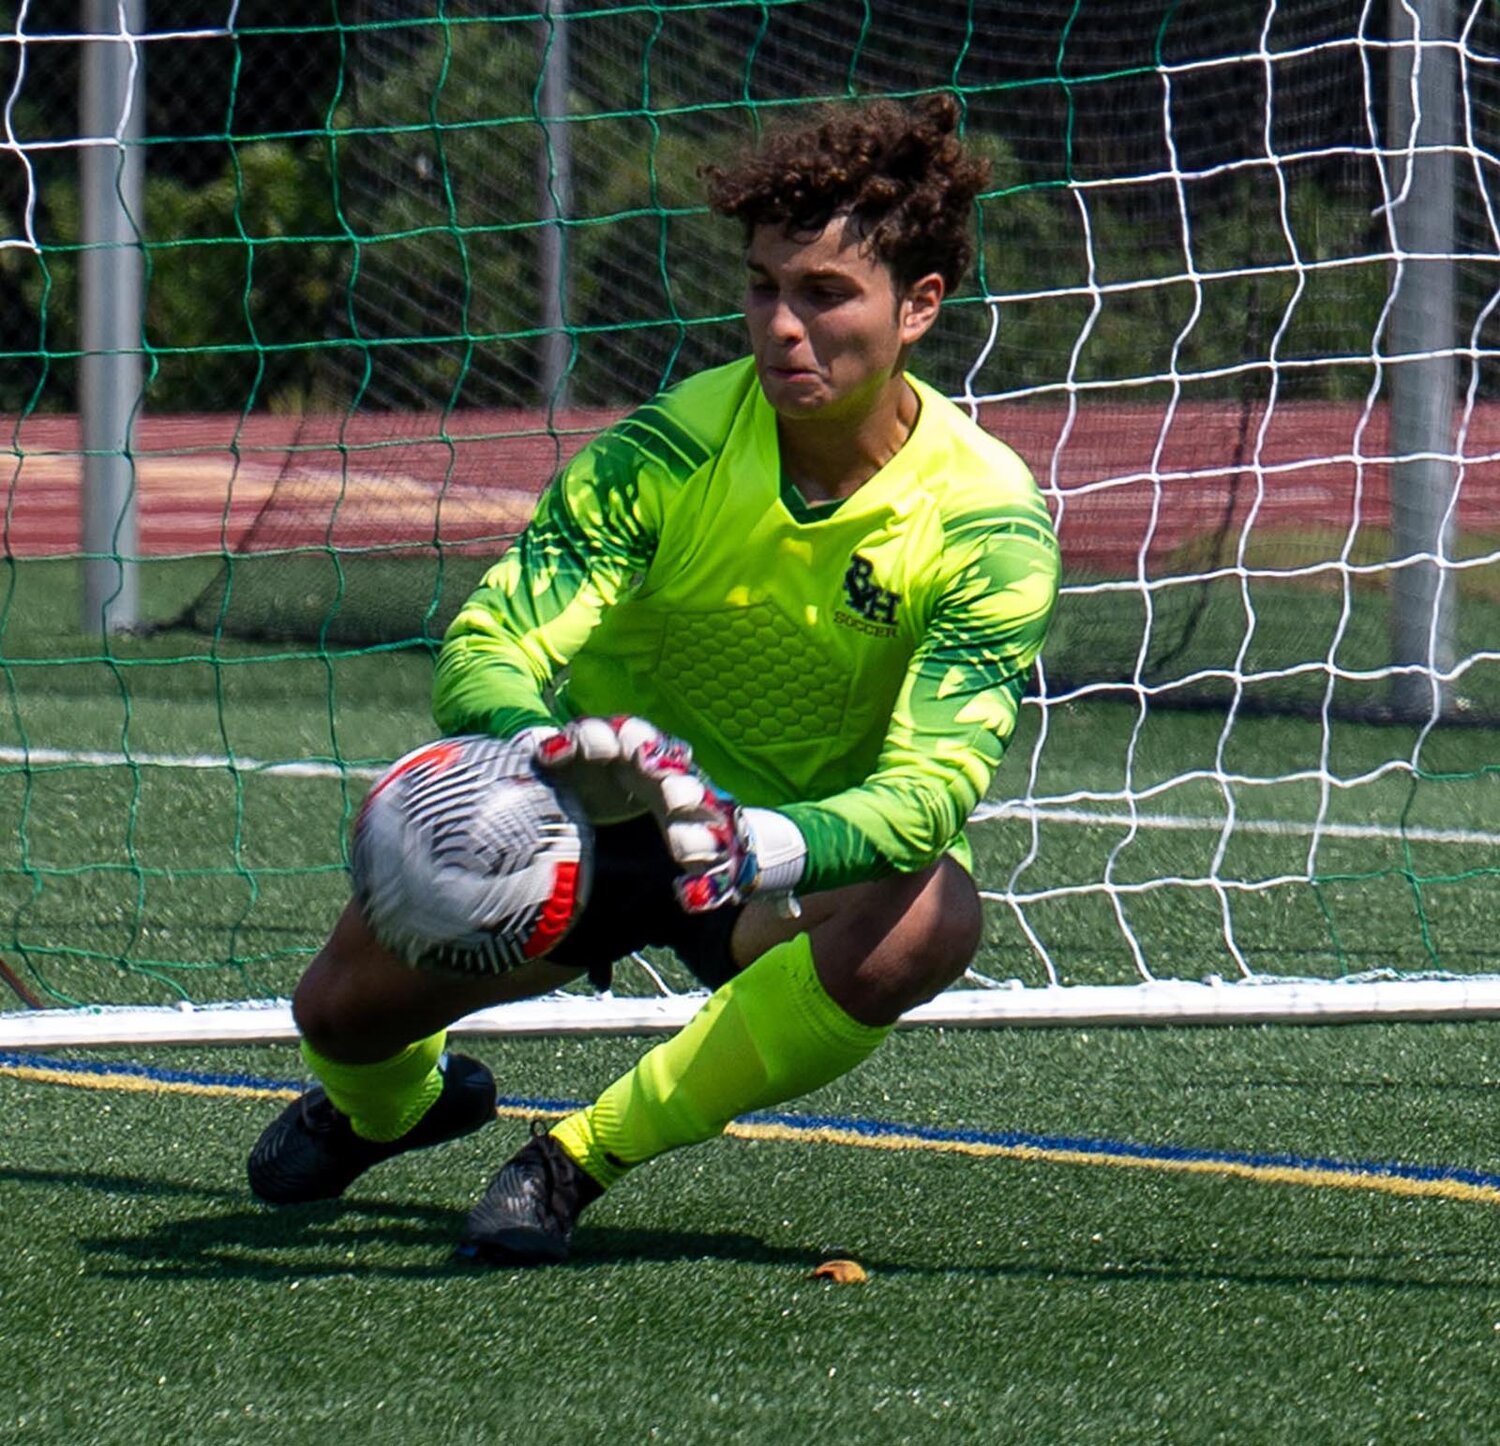 The Warwick Beacon’s Athlete of the Week is Bishop Hendricken soccer player Angelo Roca. Roca has emerged as arguably the state’s best keeper, recording three straight shutouts in net to help the Hawks improve to 6-1-1. (Photo by Leo van Dijk)